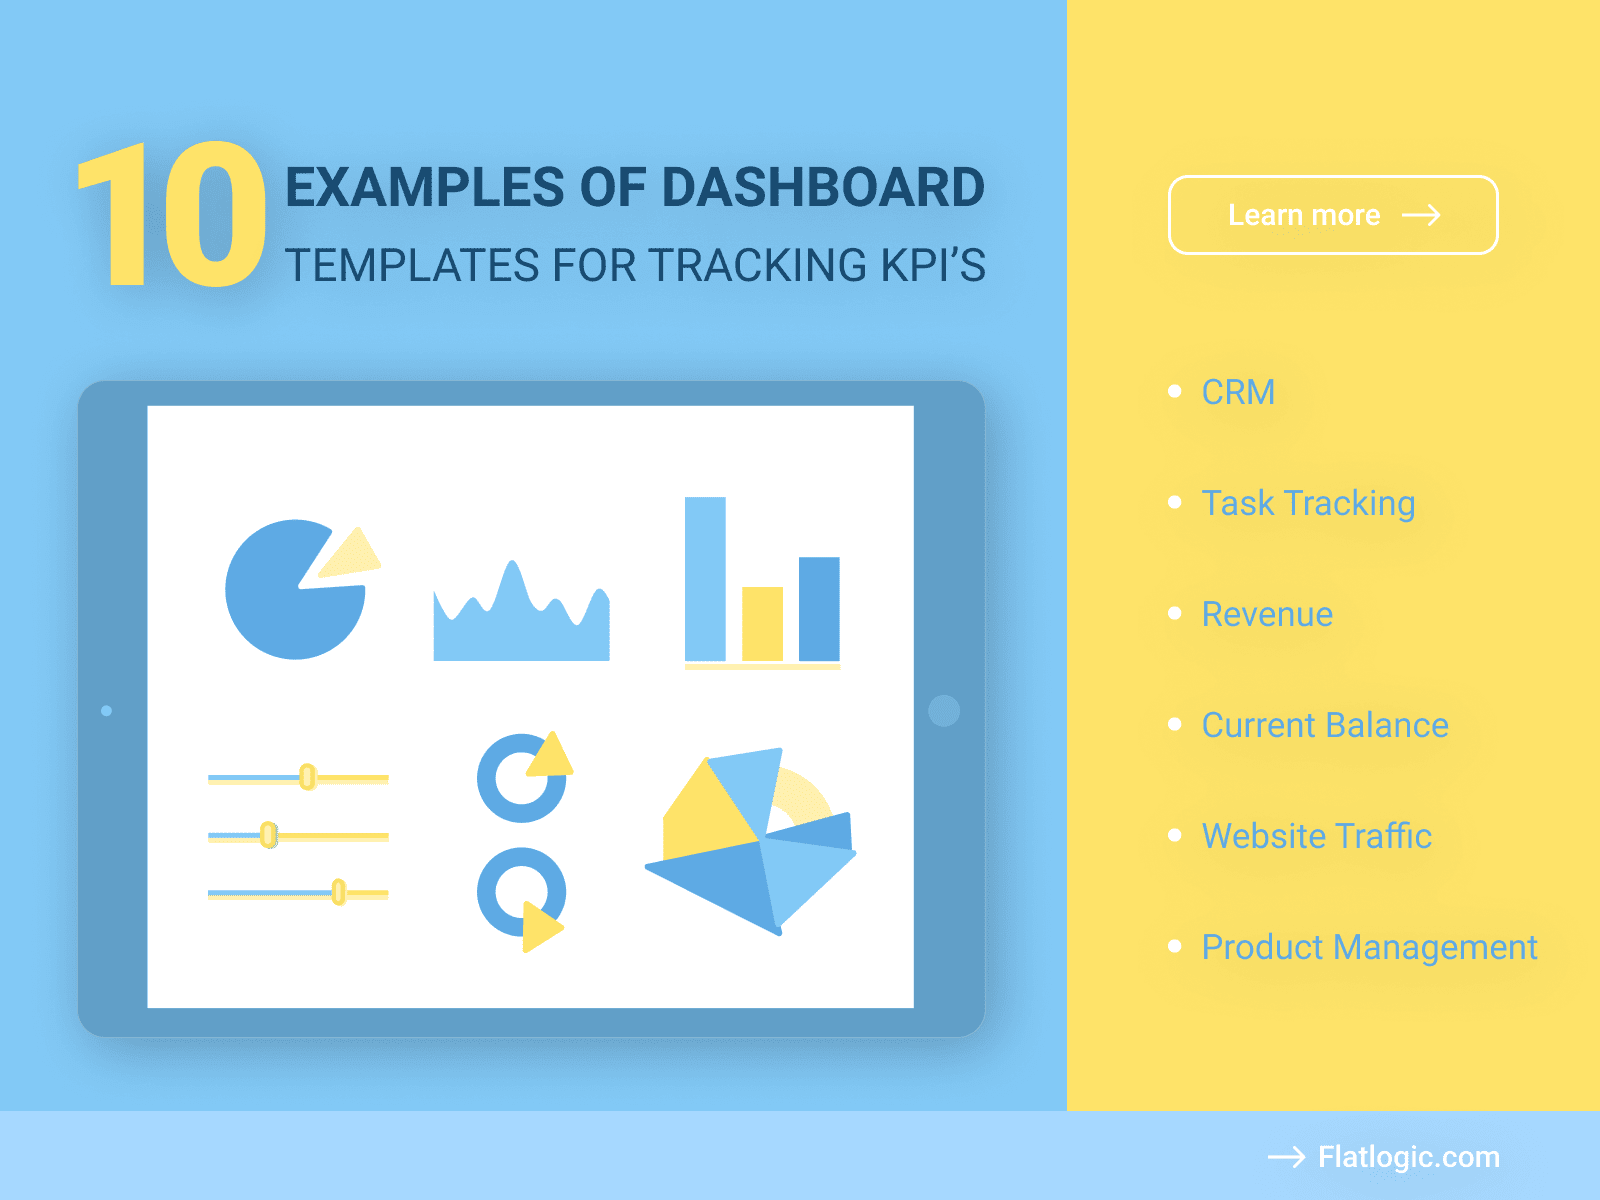 10 KPI Templates and Dashboards for Tracking KPI’s